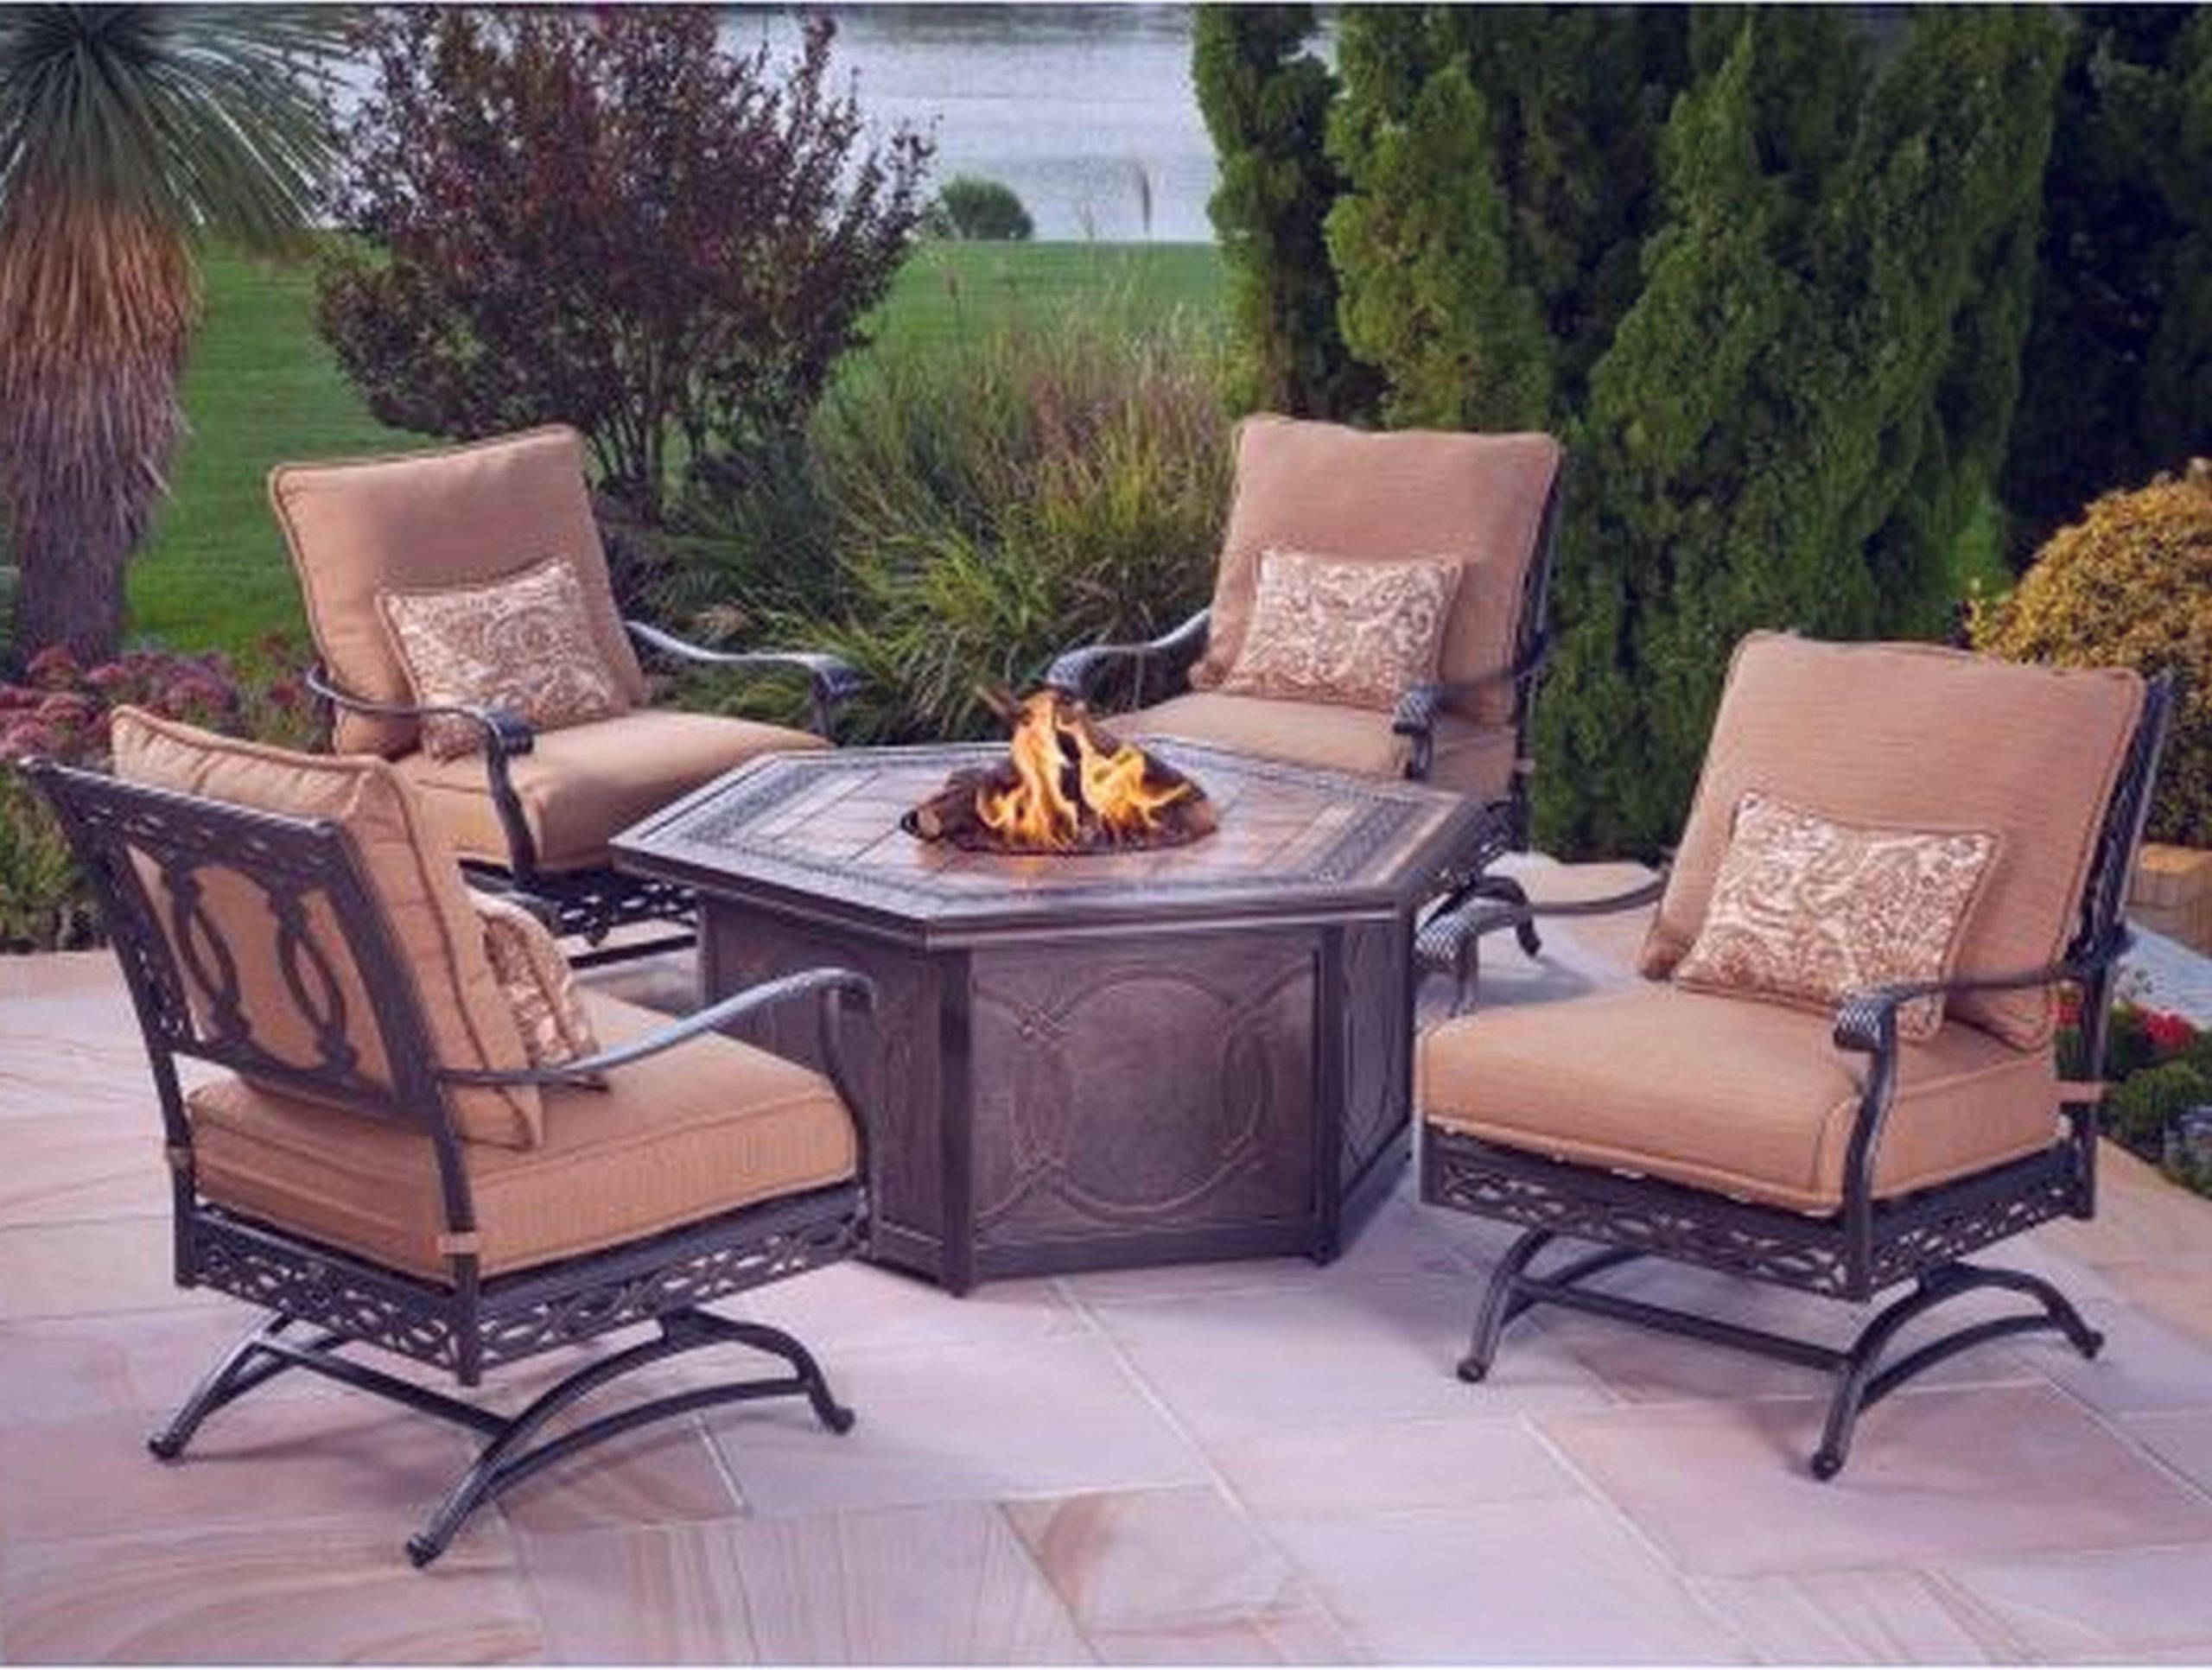 Lowes Fire Pit Patio Set
 Tips Beautiful Garden Decor With Lowes Lawn Chairs